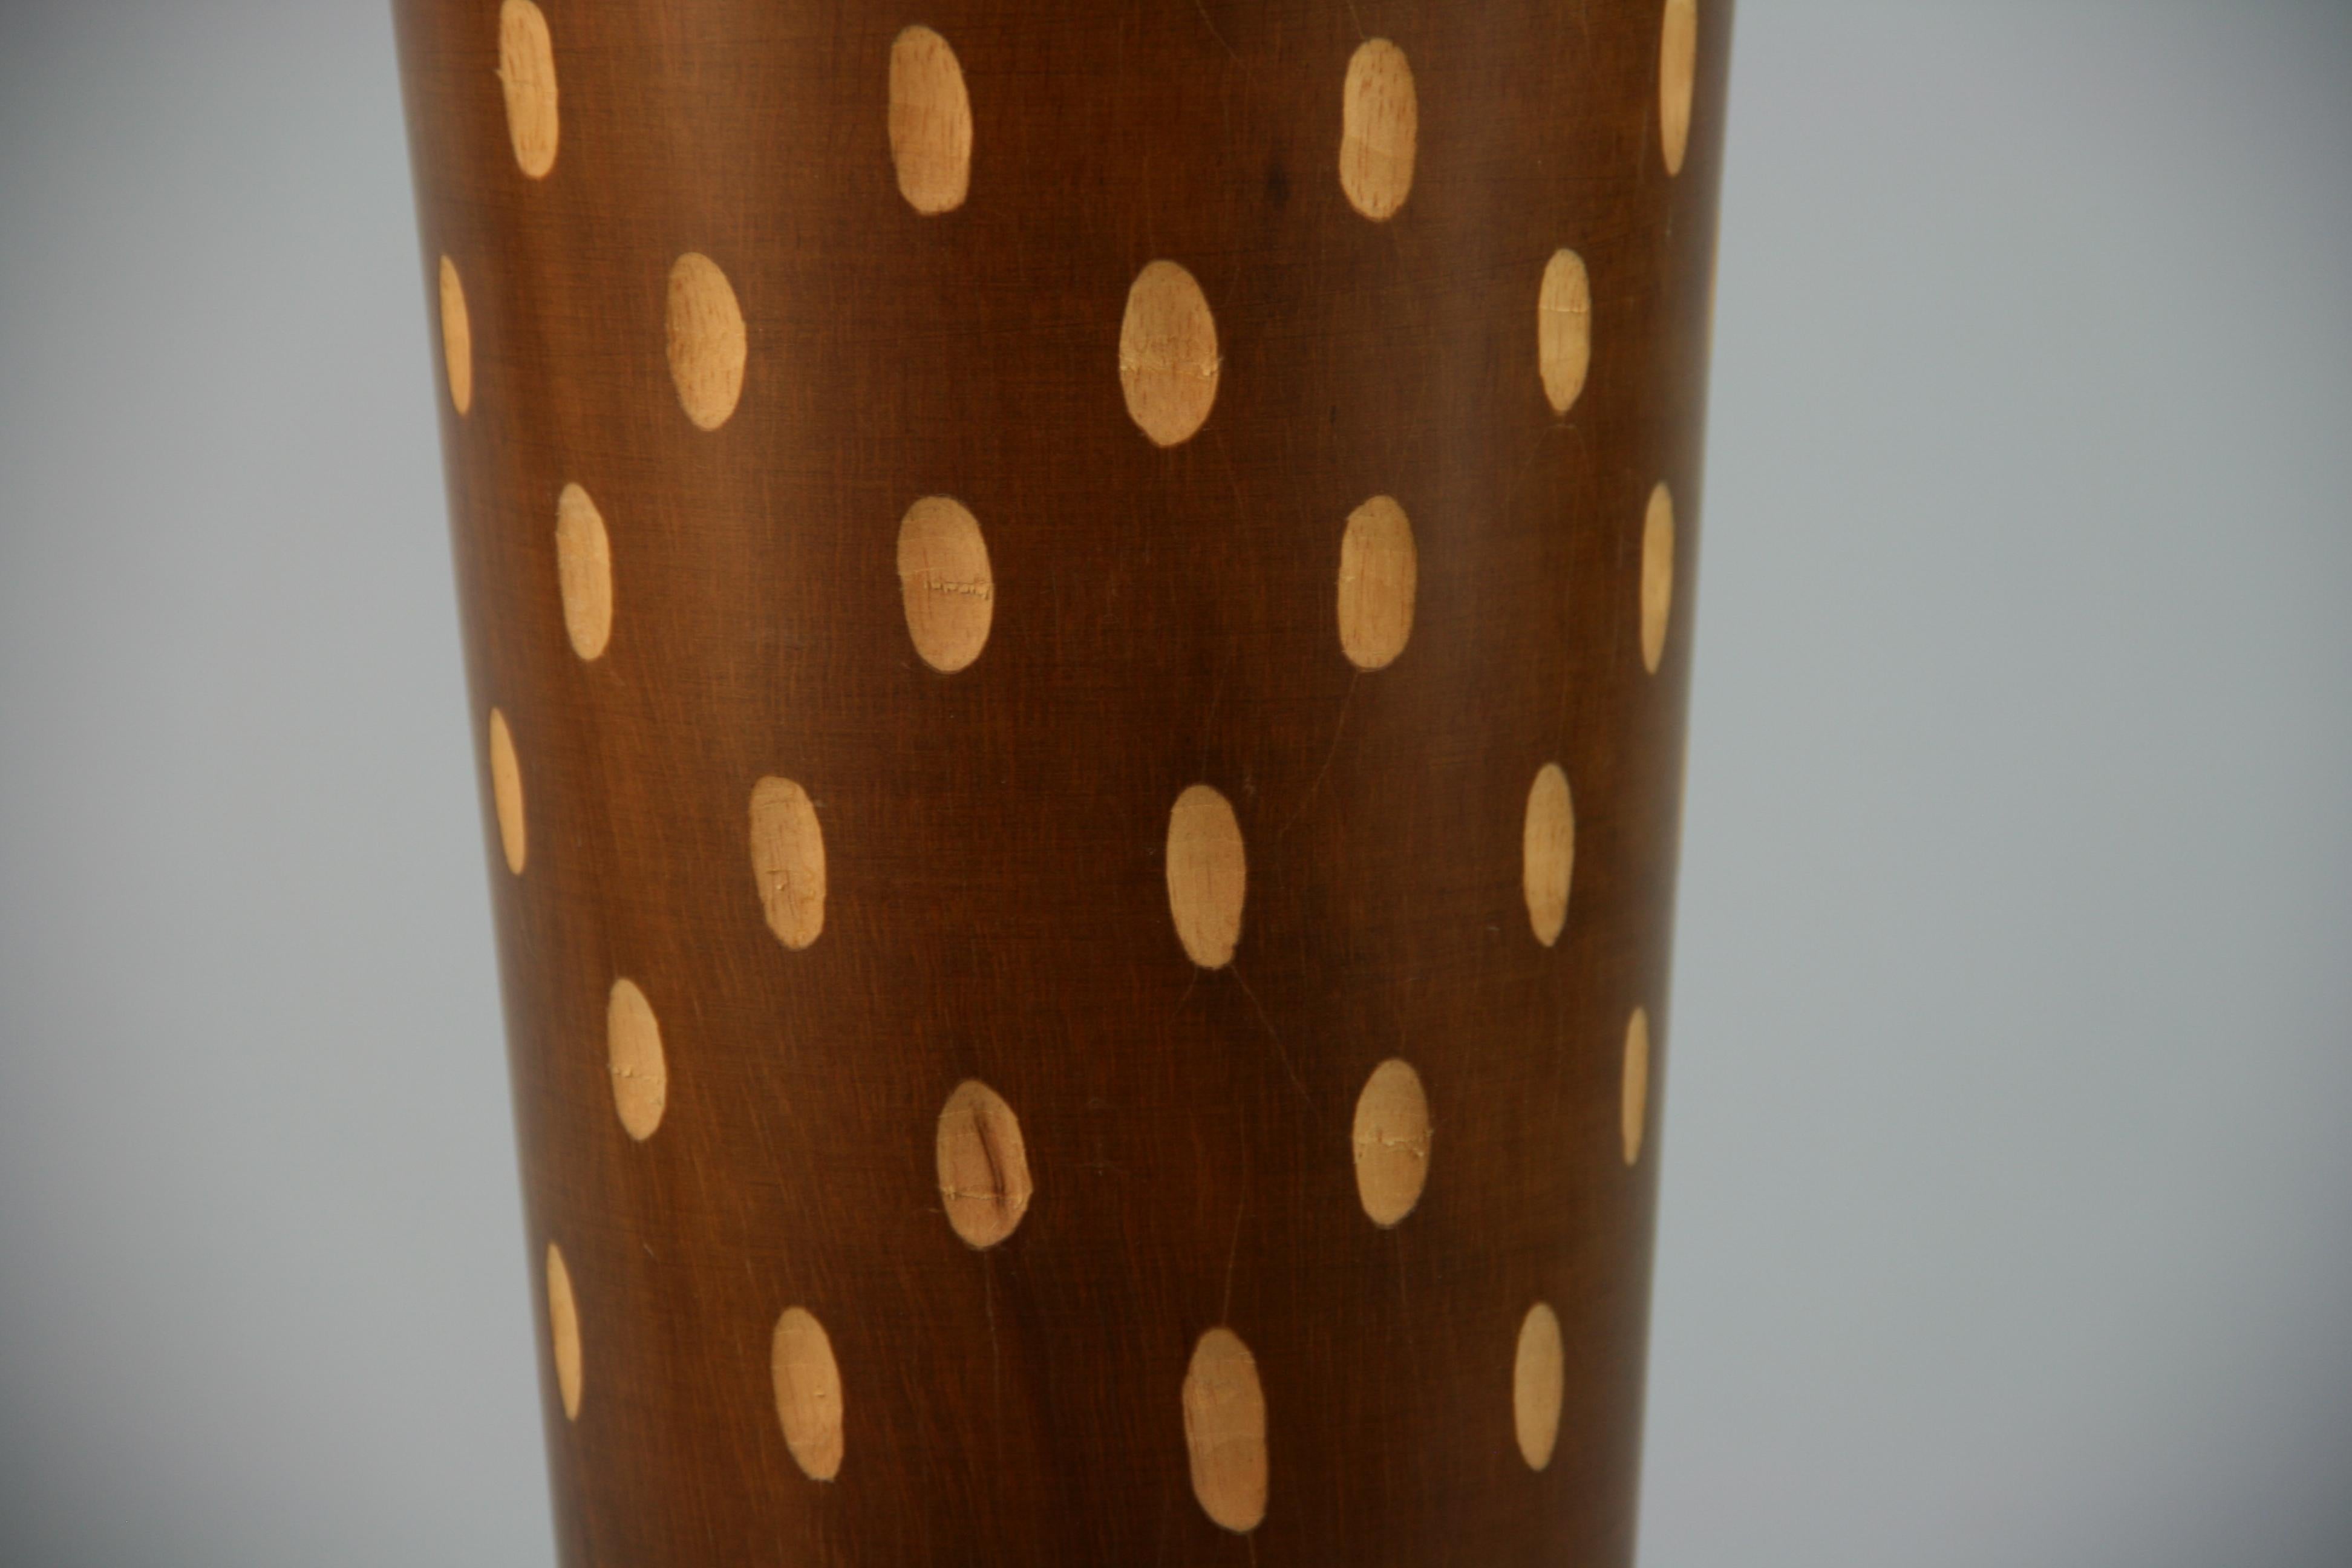 Mid-20th Century Japanese Art Deco Style Wood Hand Turned Vase with Incised Oval Cutouts For Sale